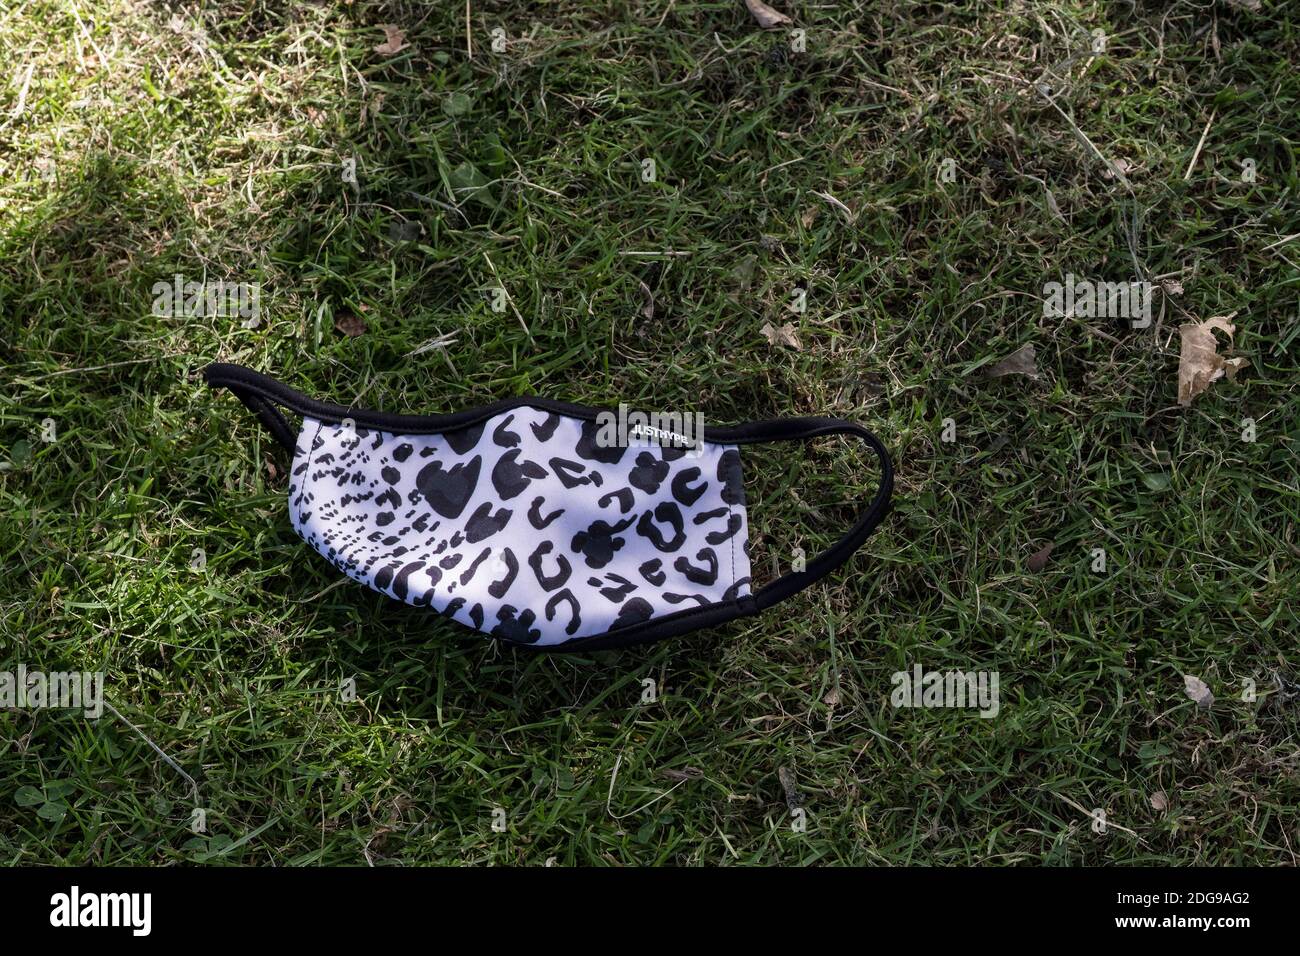 A Justhype adult animal print face mask dropped on the grass. Stock Photo